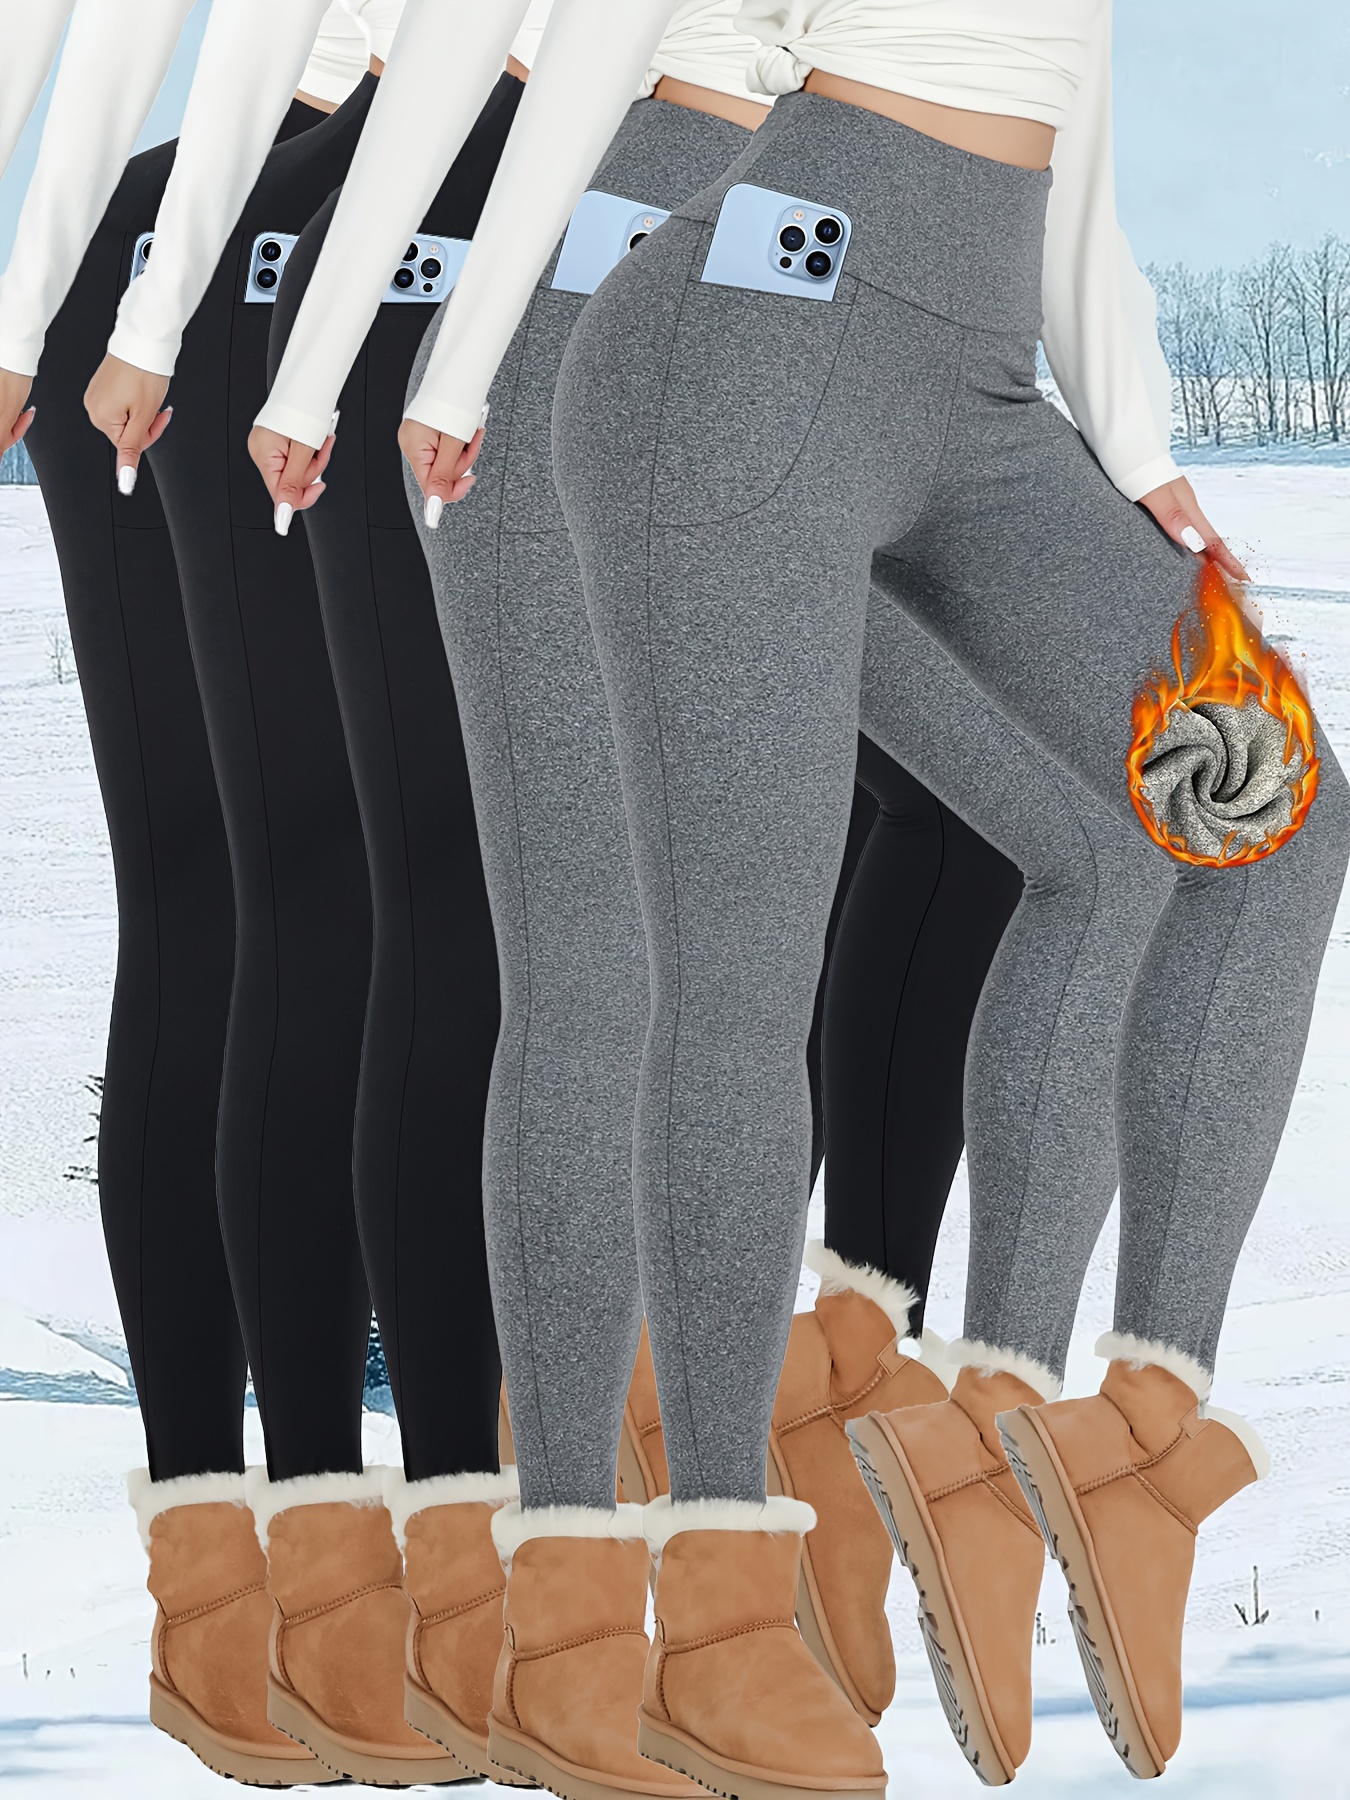 Fleece Lined Leggings Women Winter Warm Thick Tights Thermal